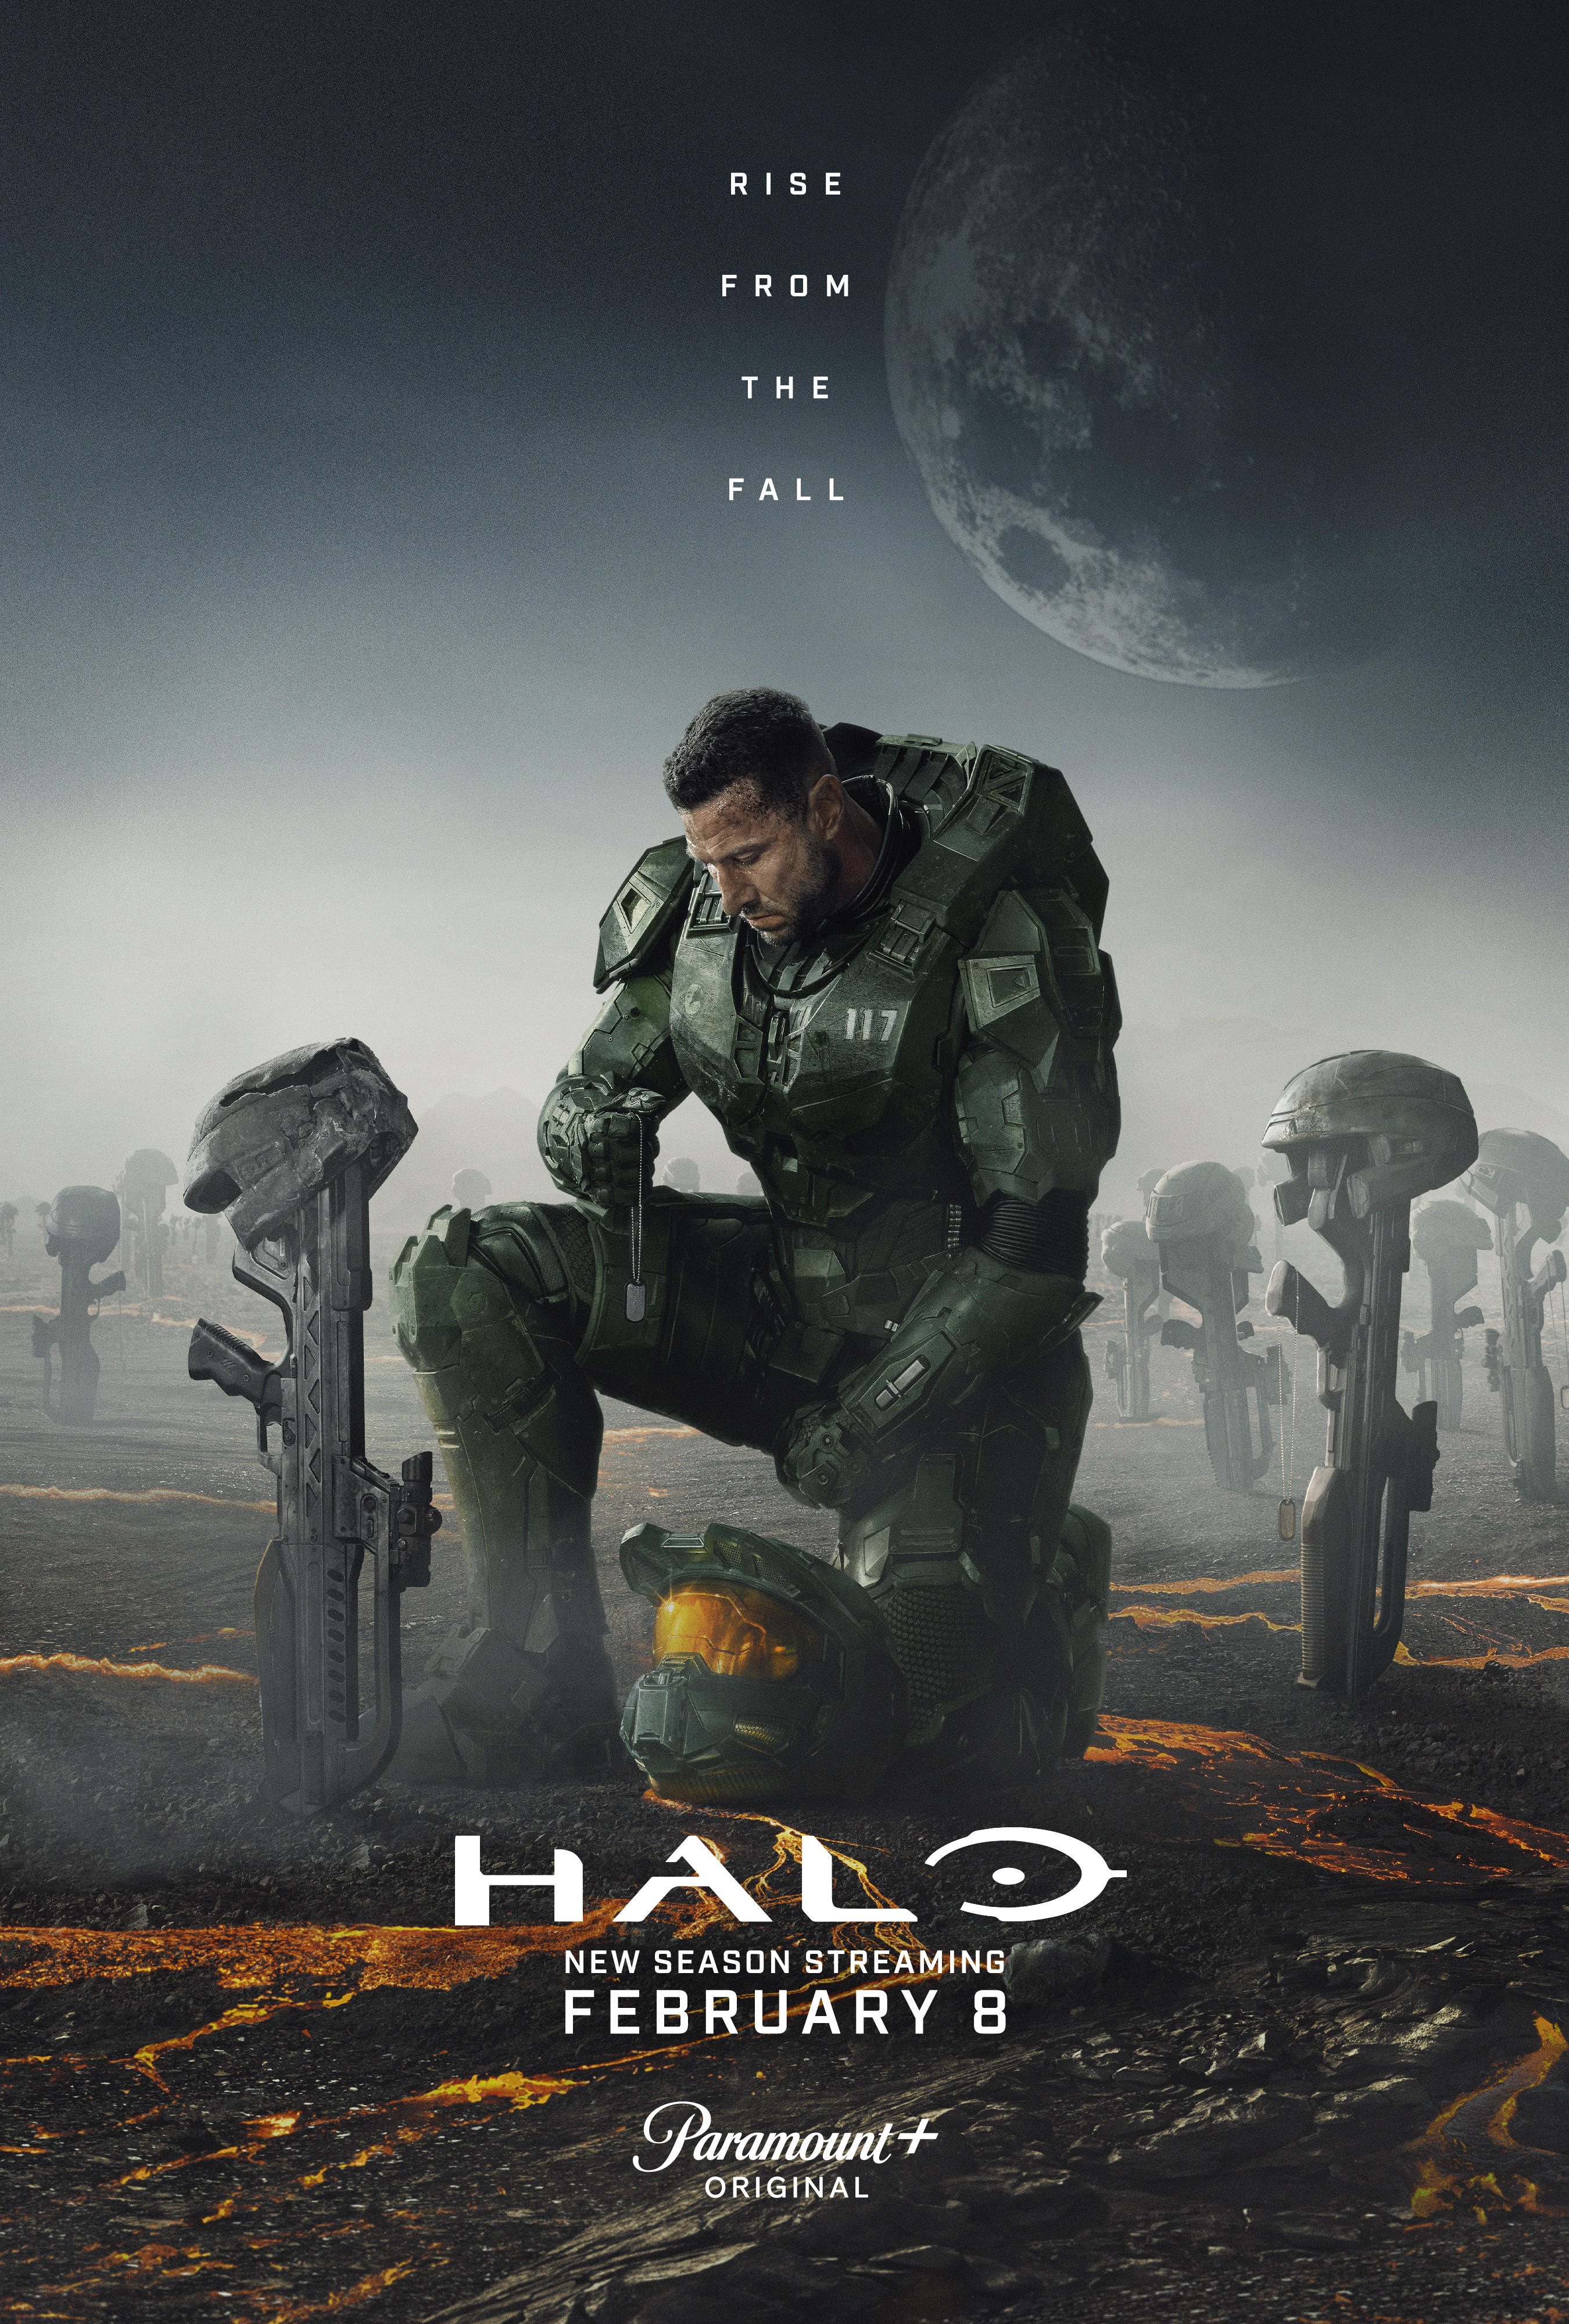 Halo' Episode Guide: How Many Episodes in the Paramount+ Series?